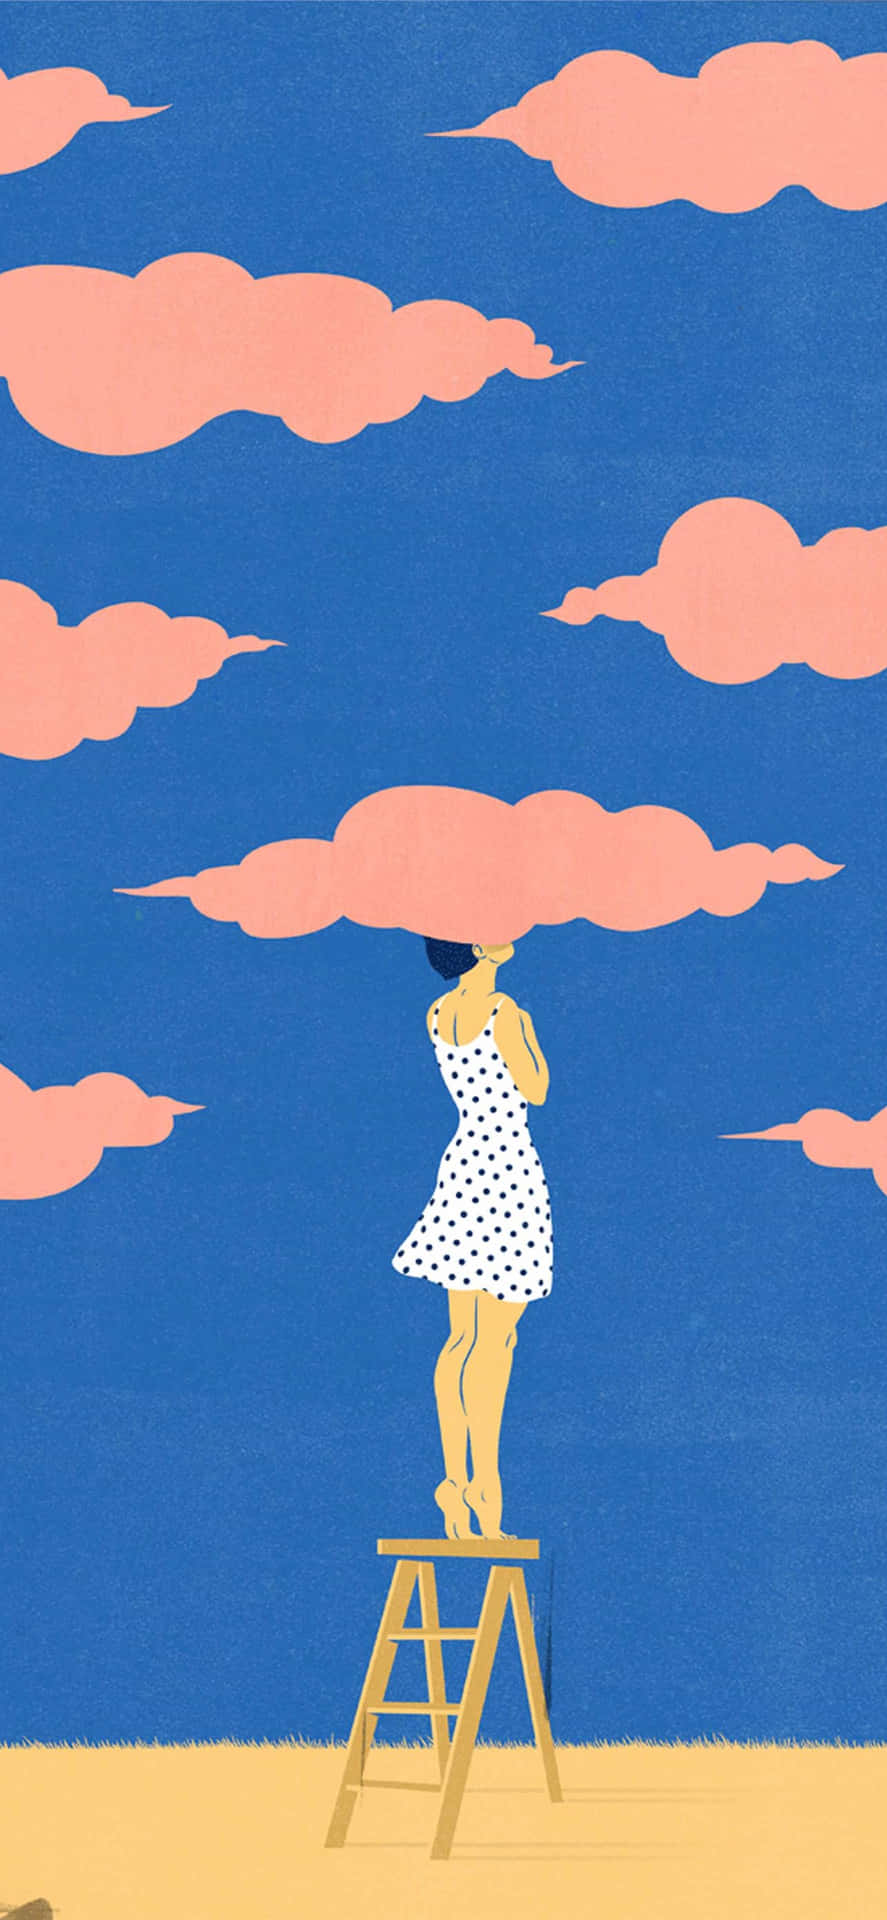 A Girl Is Standing On A Ladder In The Sky Wallpaper